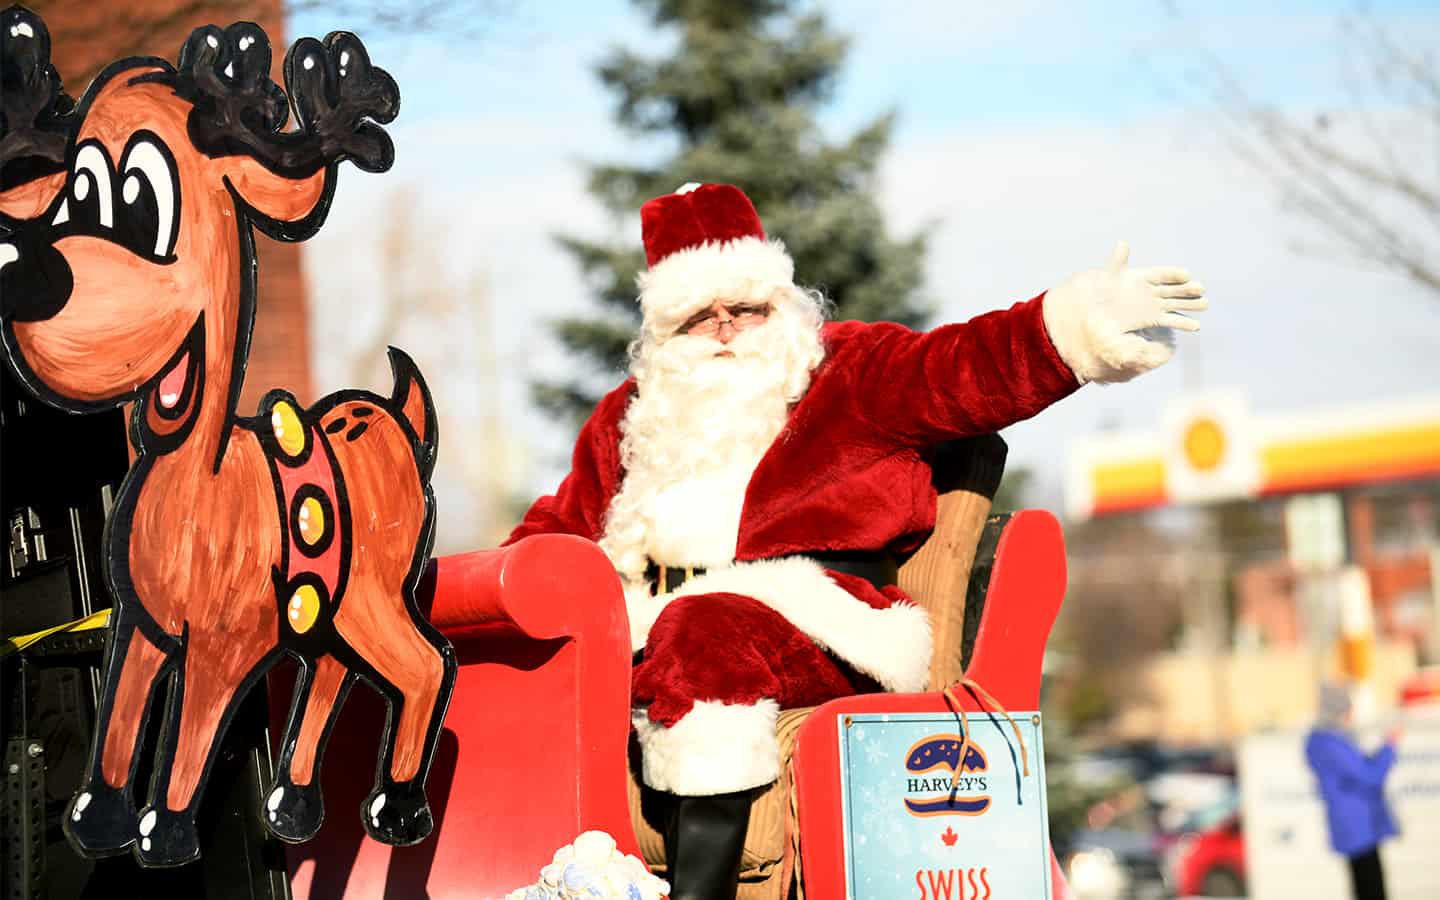                      St. Clements joins list of cancelled Santa Claus parades                             
                     